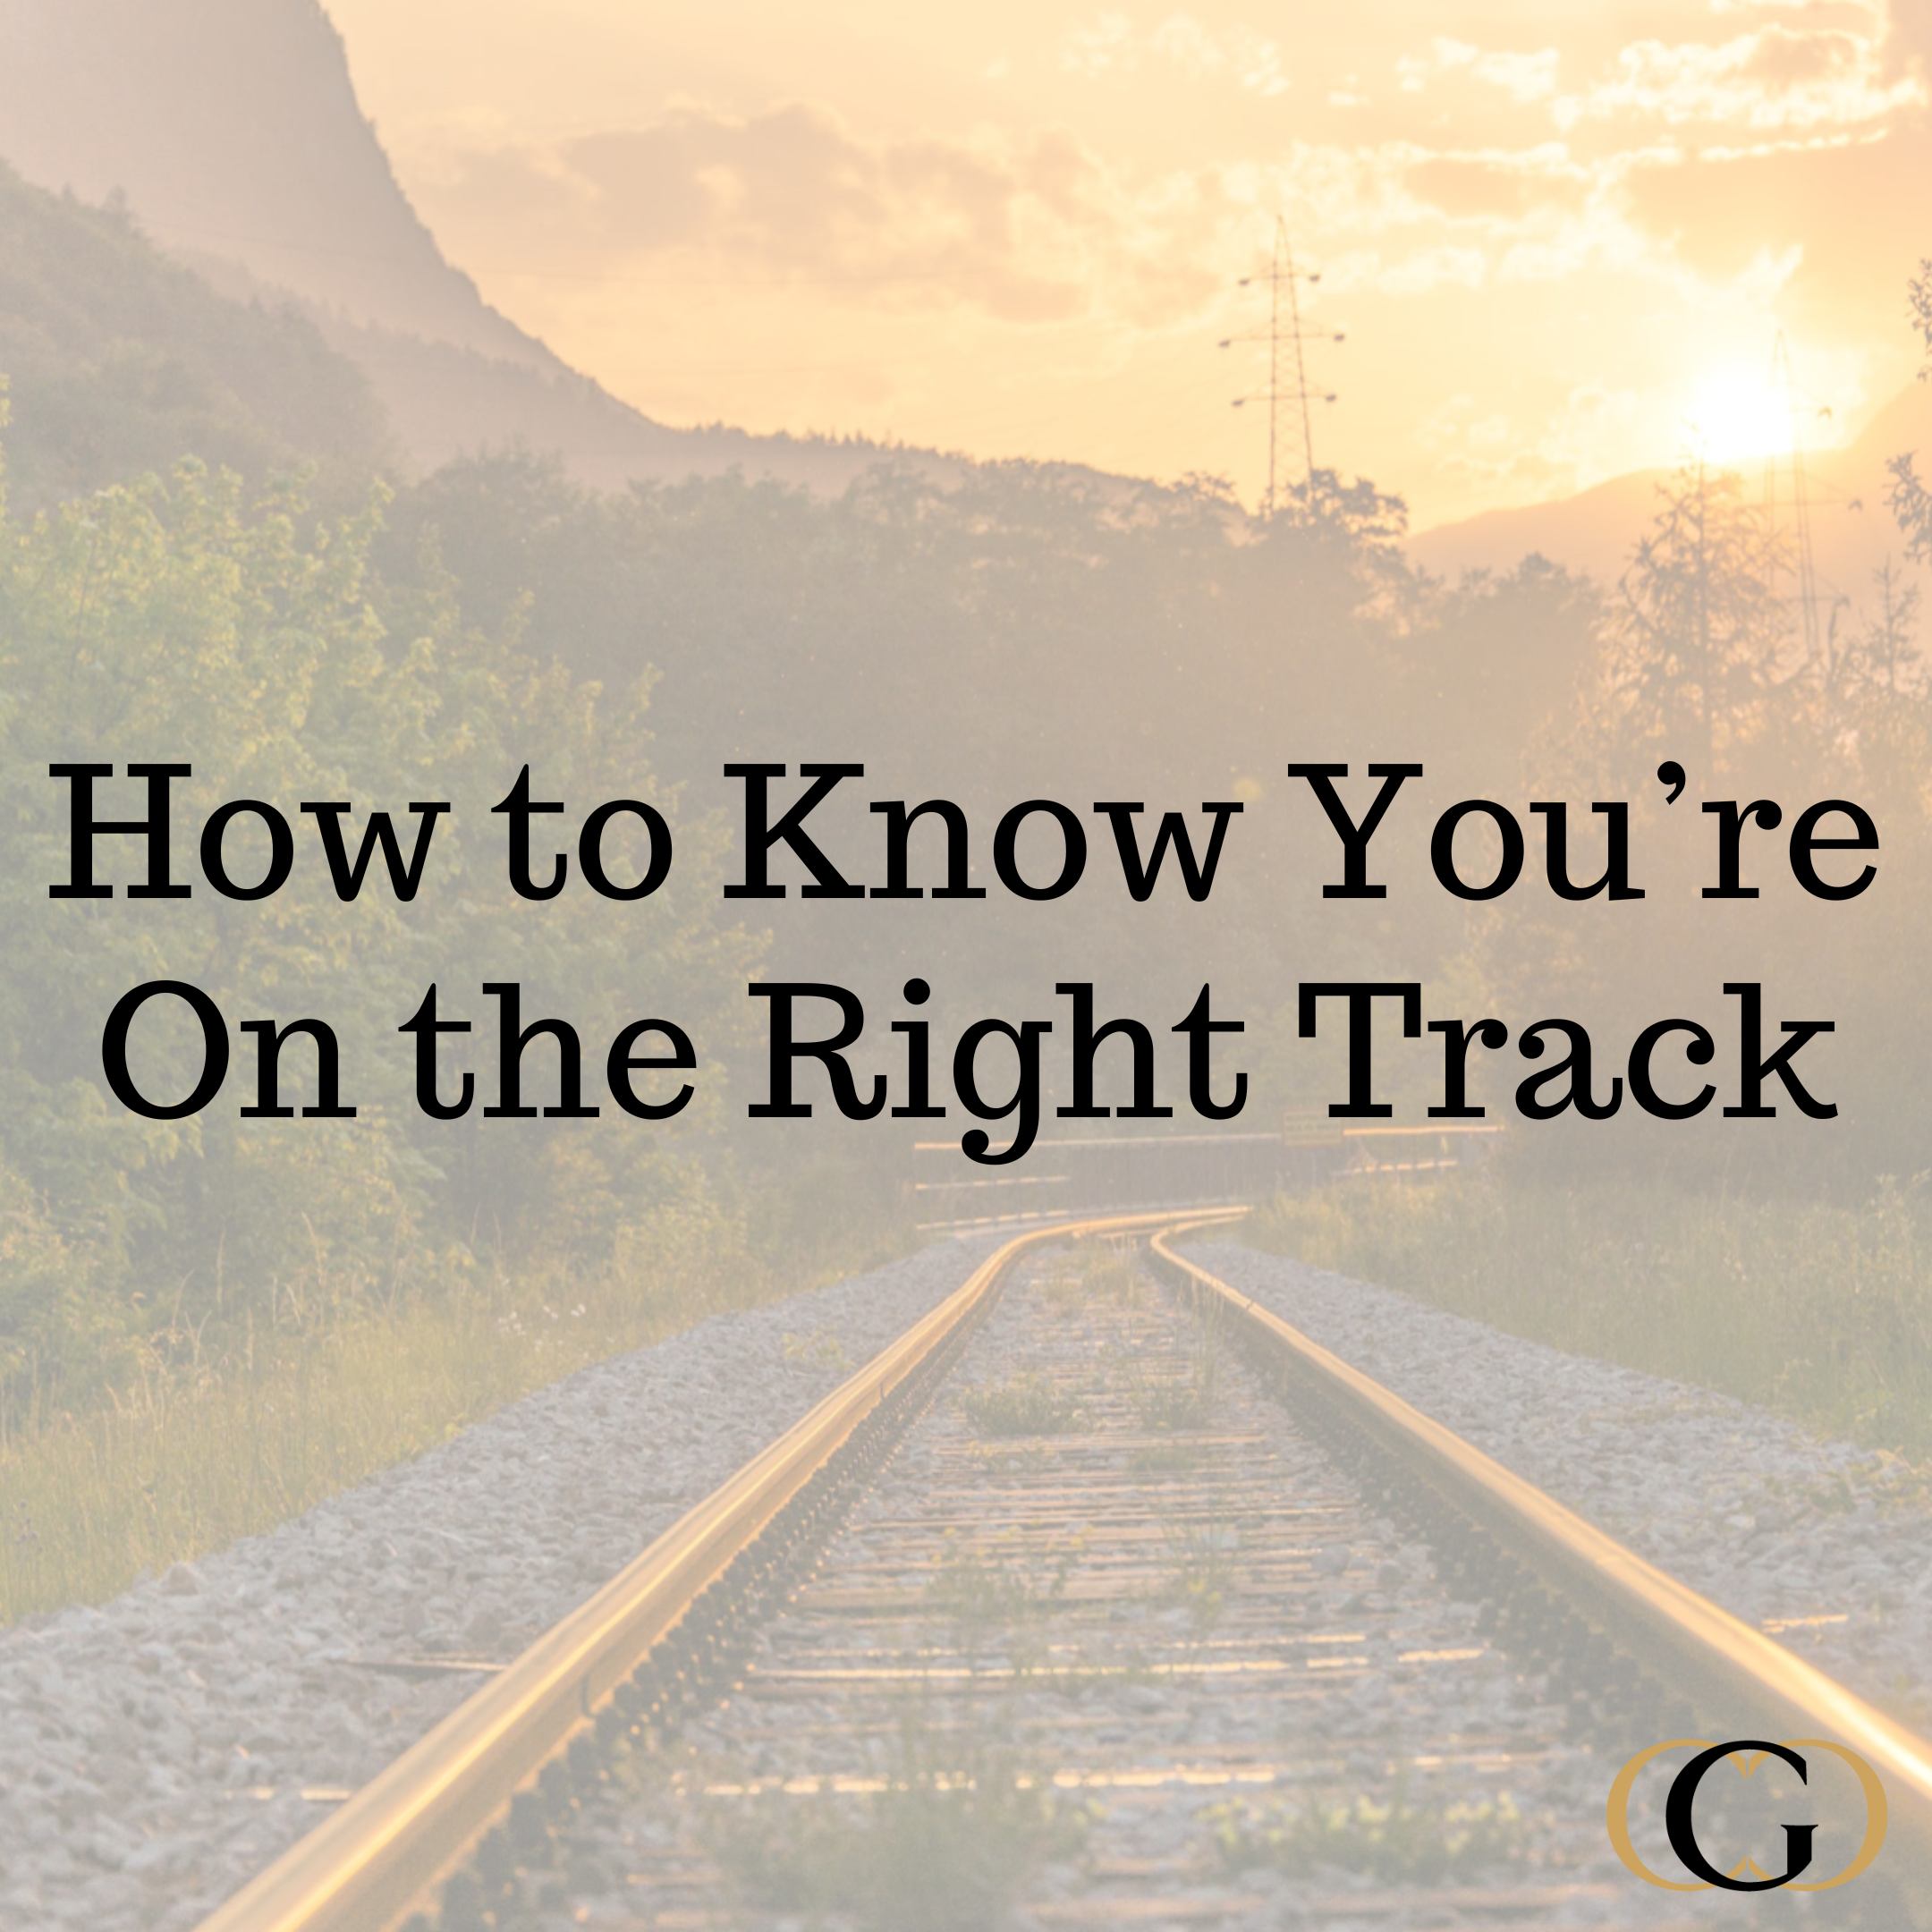 How to Know You’re On the Right Track